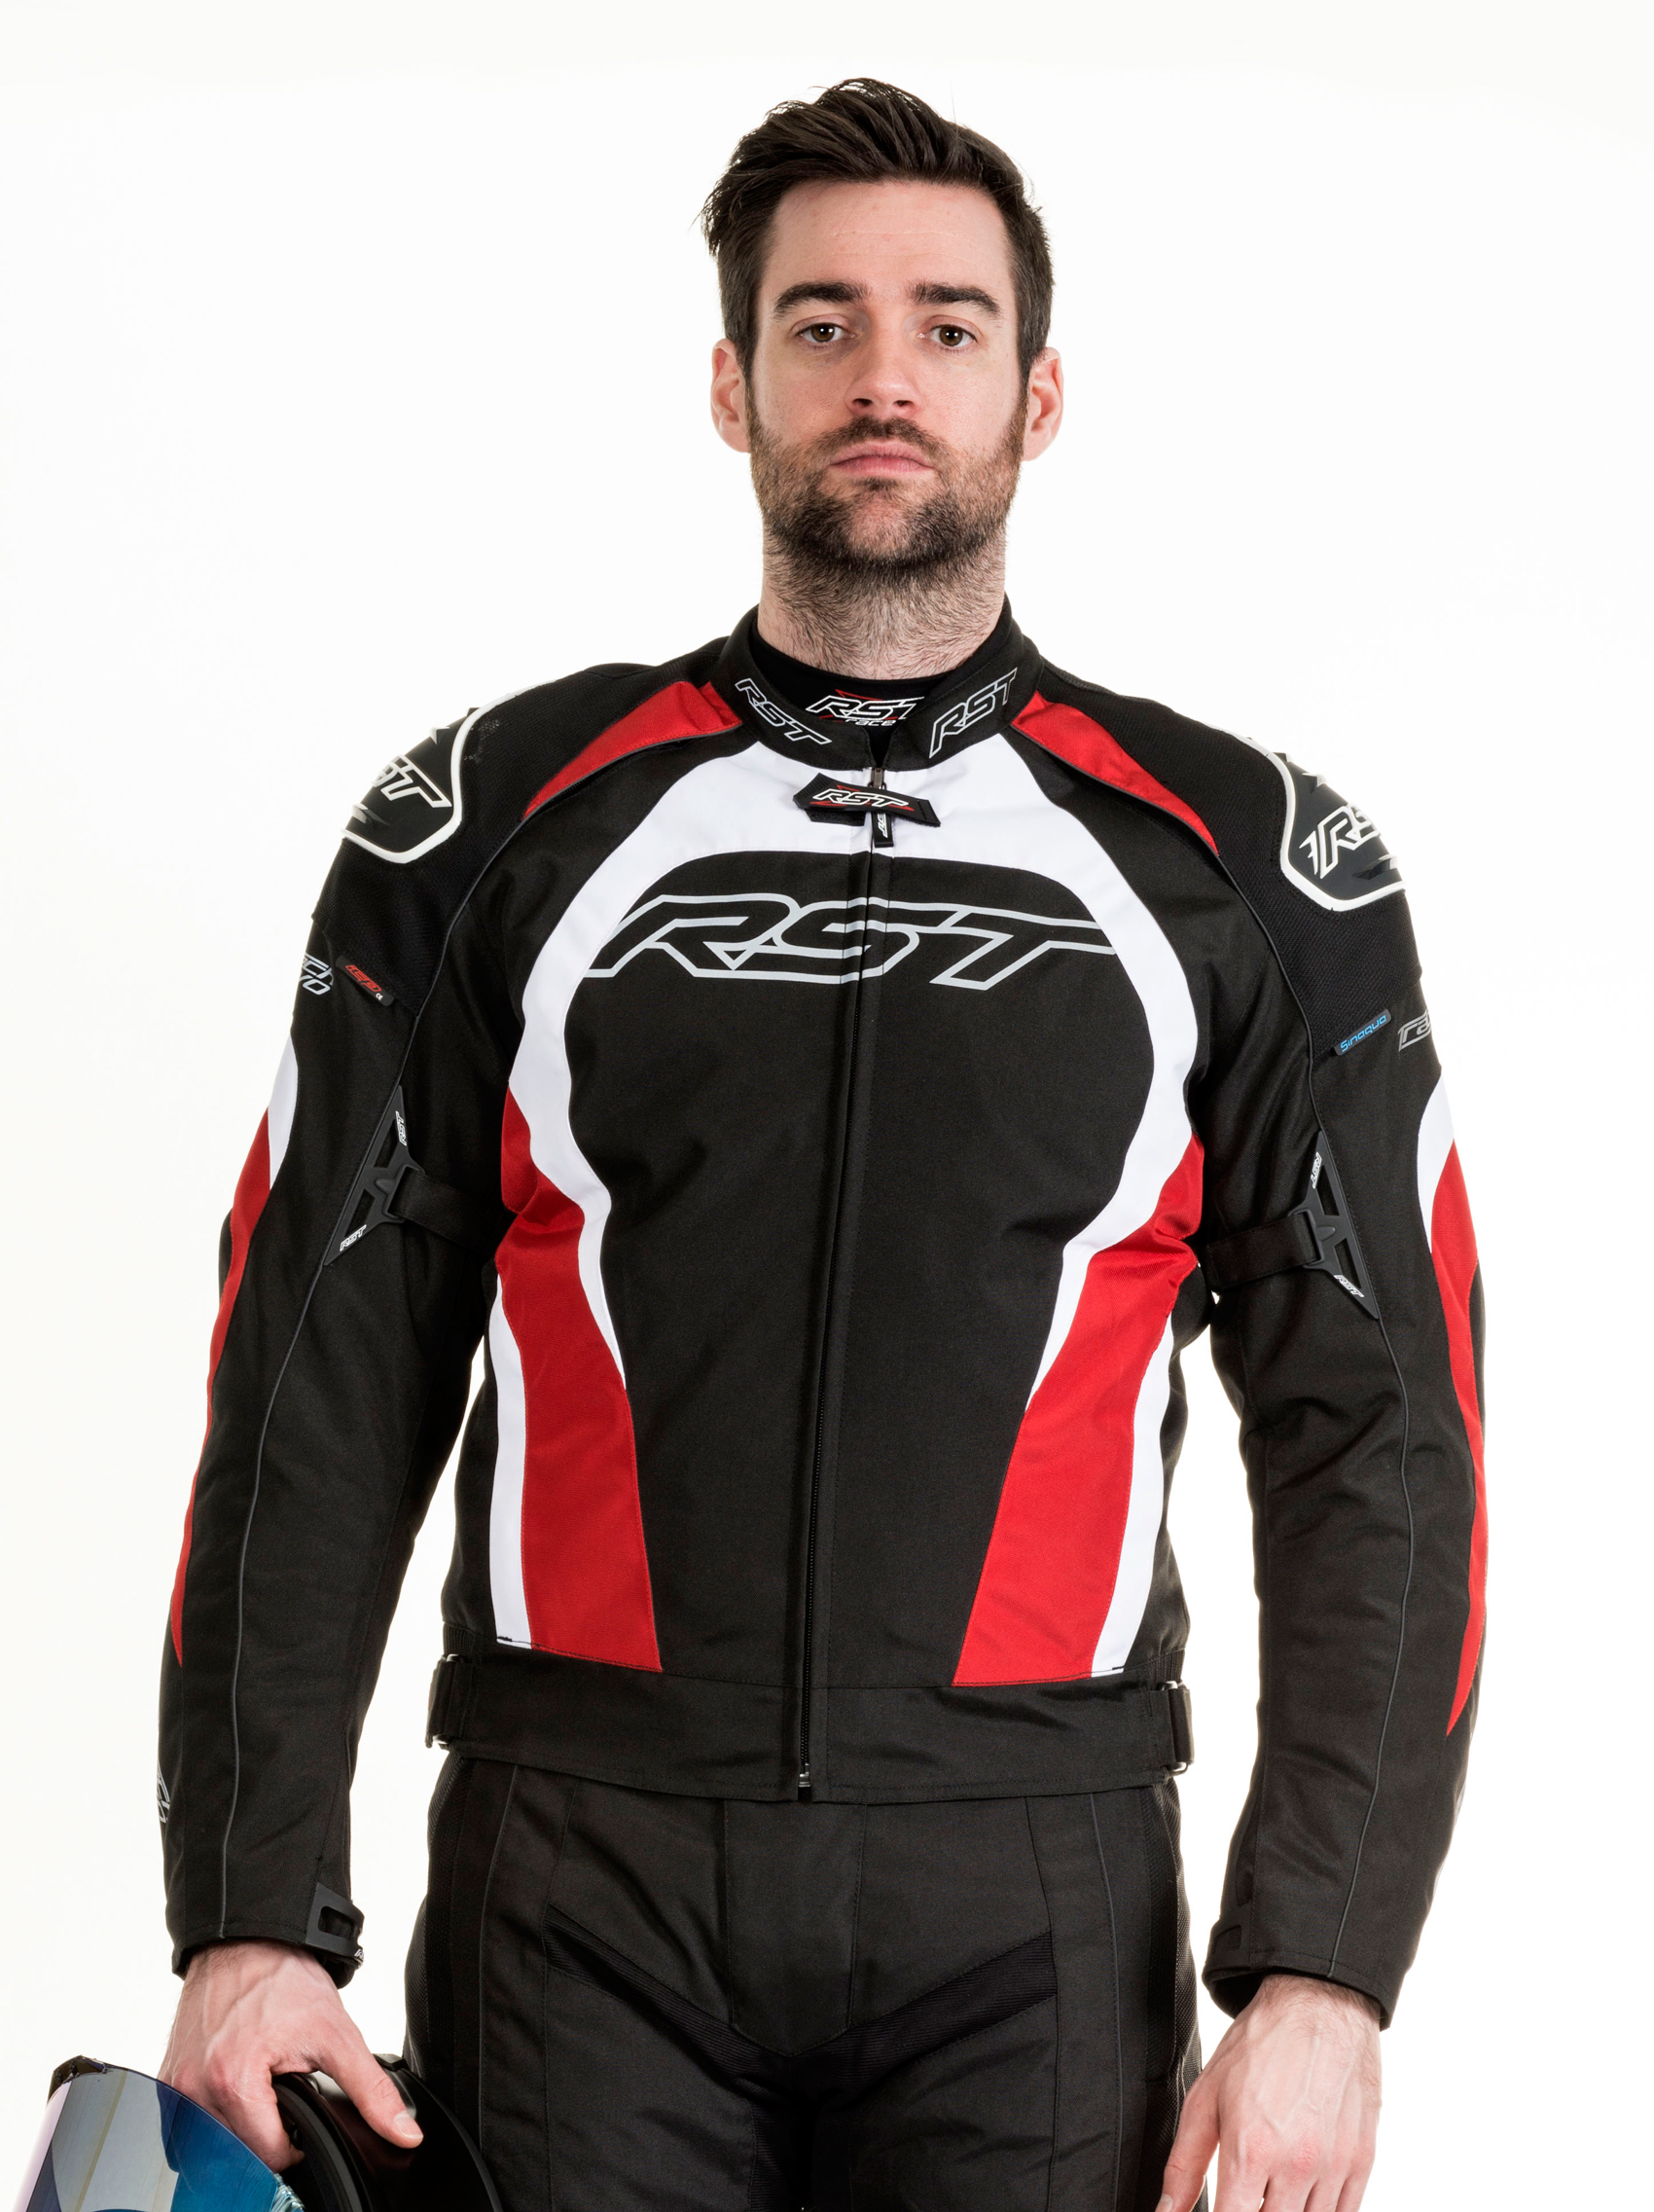 RST Tractech Evo leather motorcycle jacket for summer